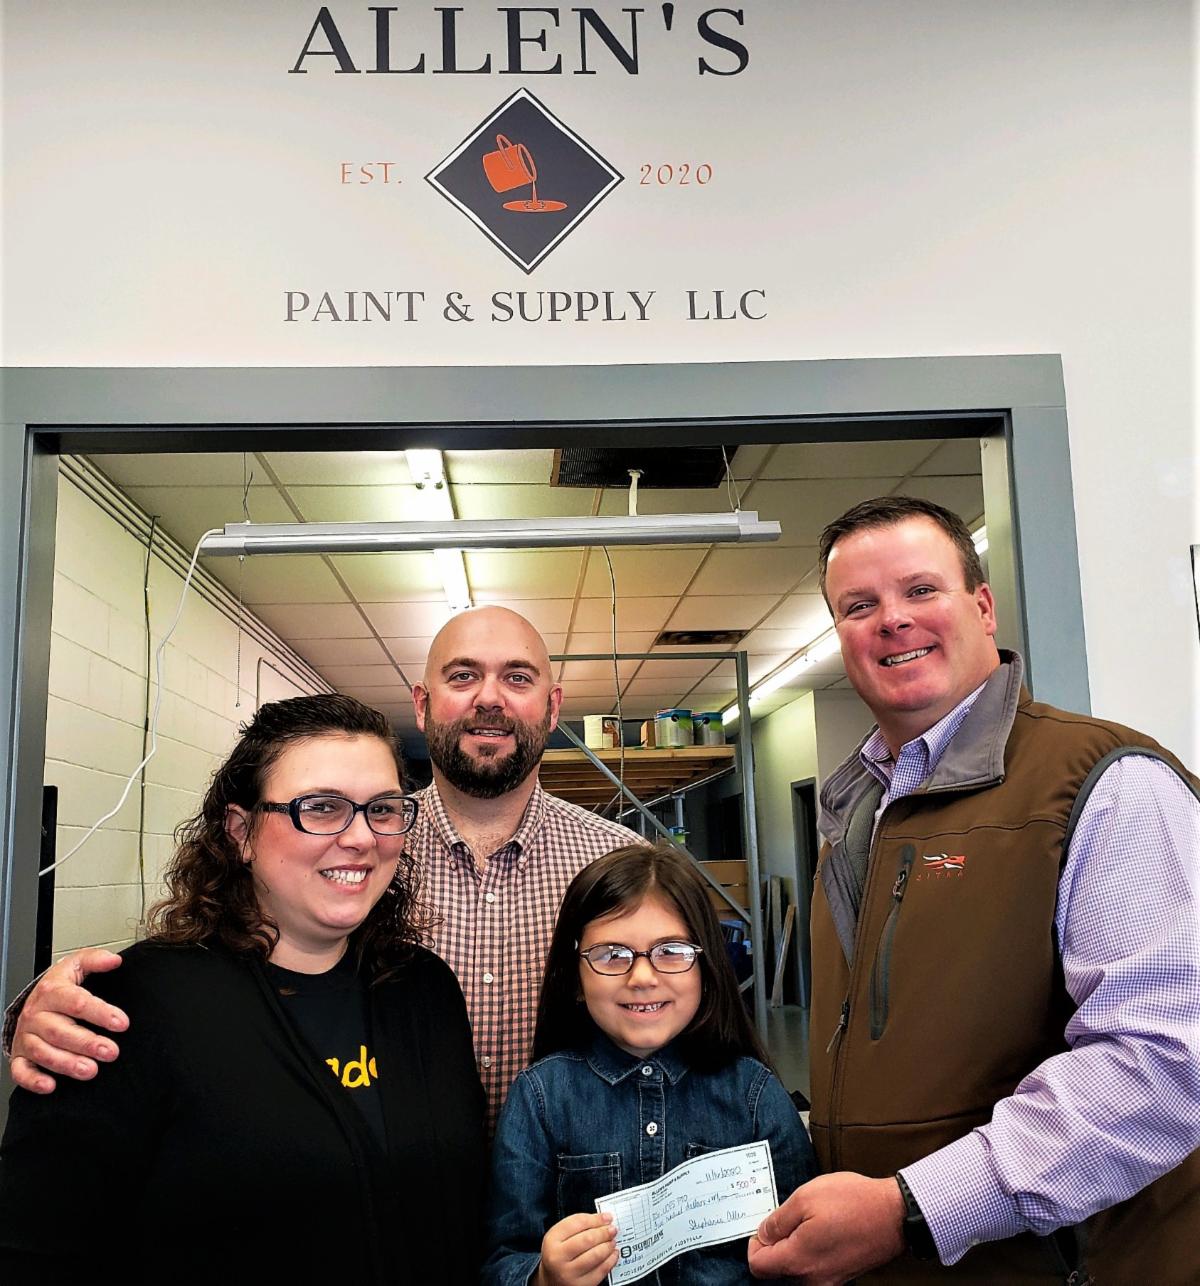 Allens Paint & Supply Makes Donation to UCES PTO